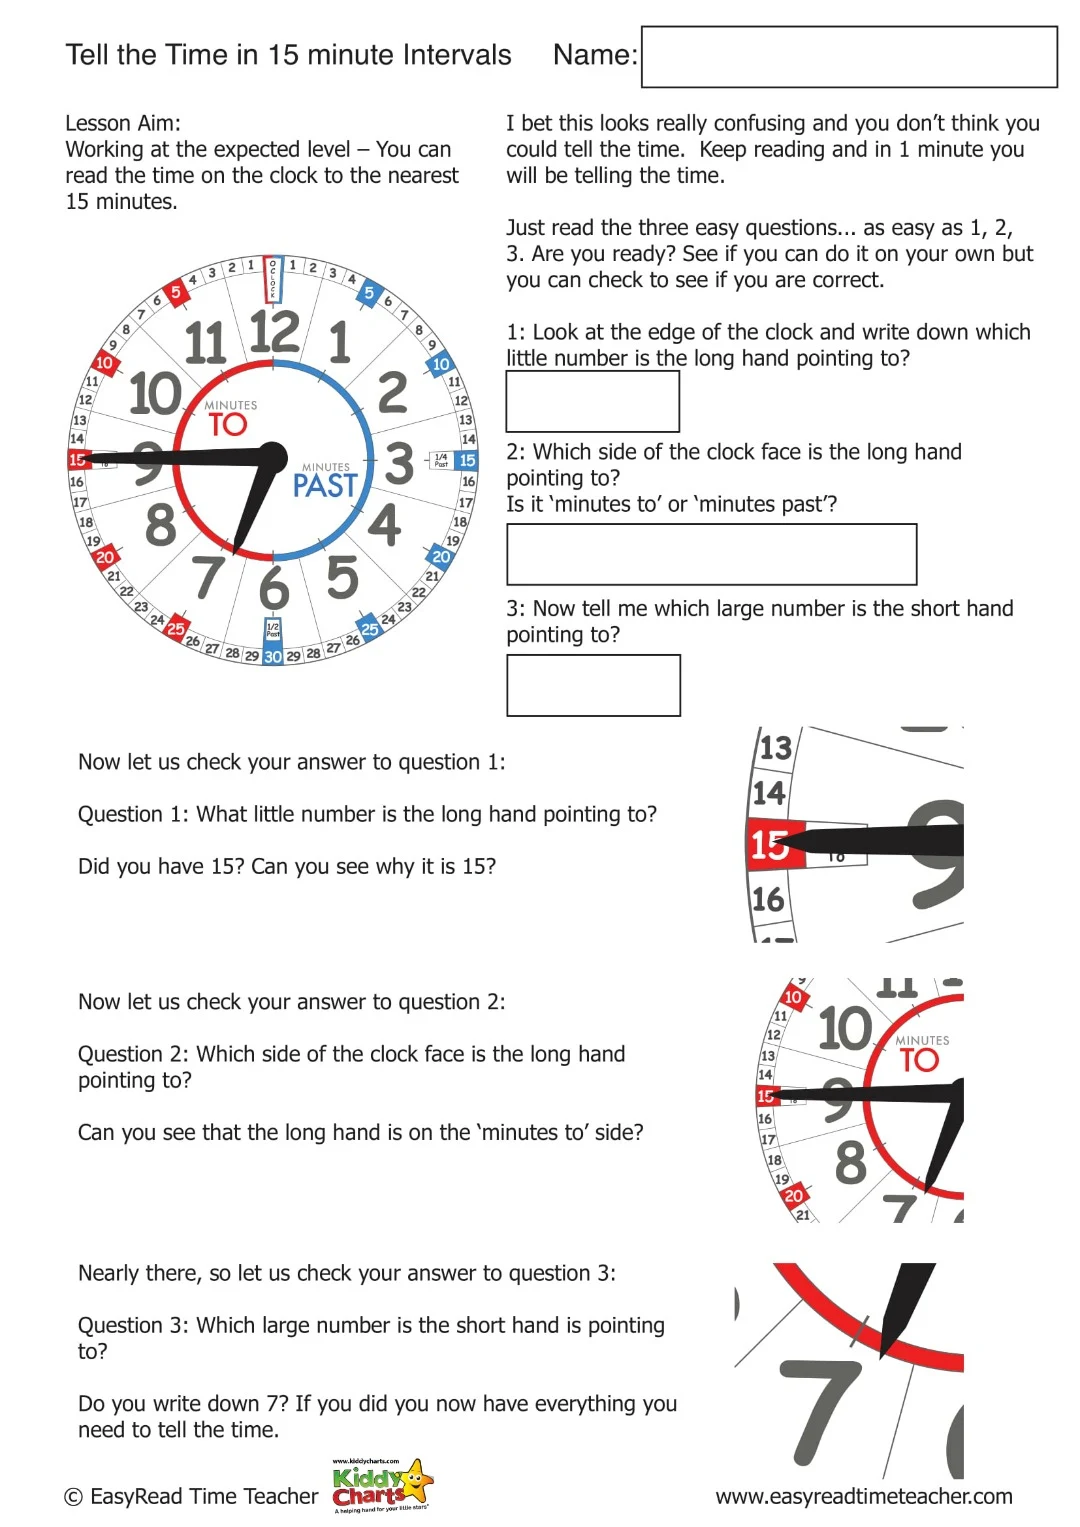 Learning to tell the time in 15 minute intervals - worksheets for the kids! #time #homeschool #learning #kids